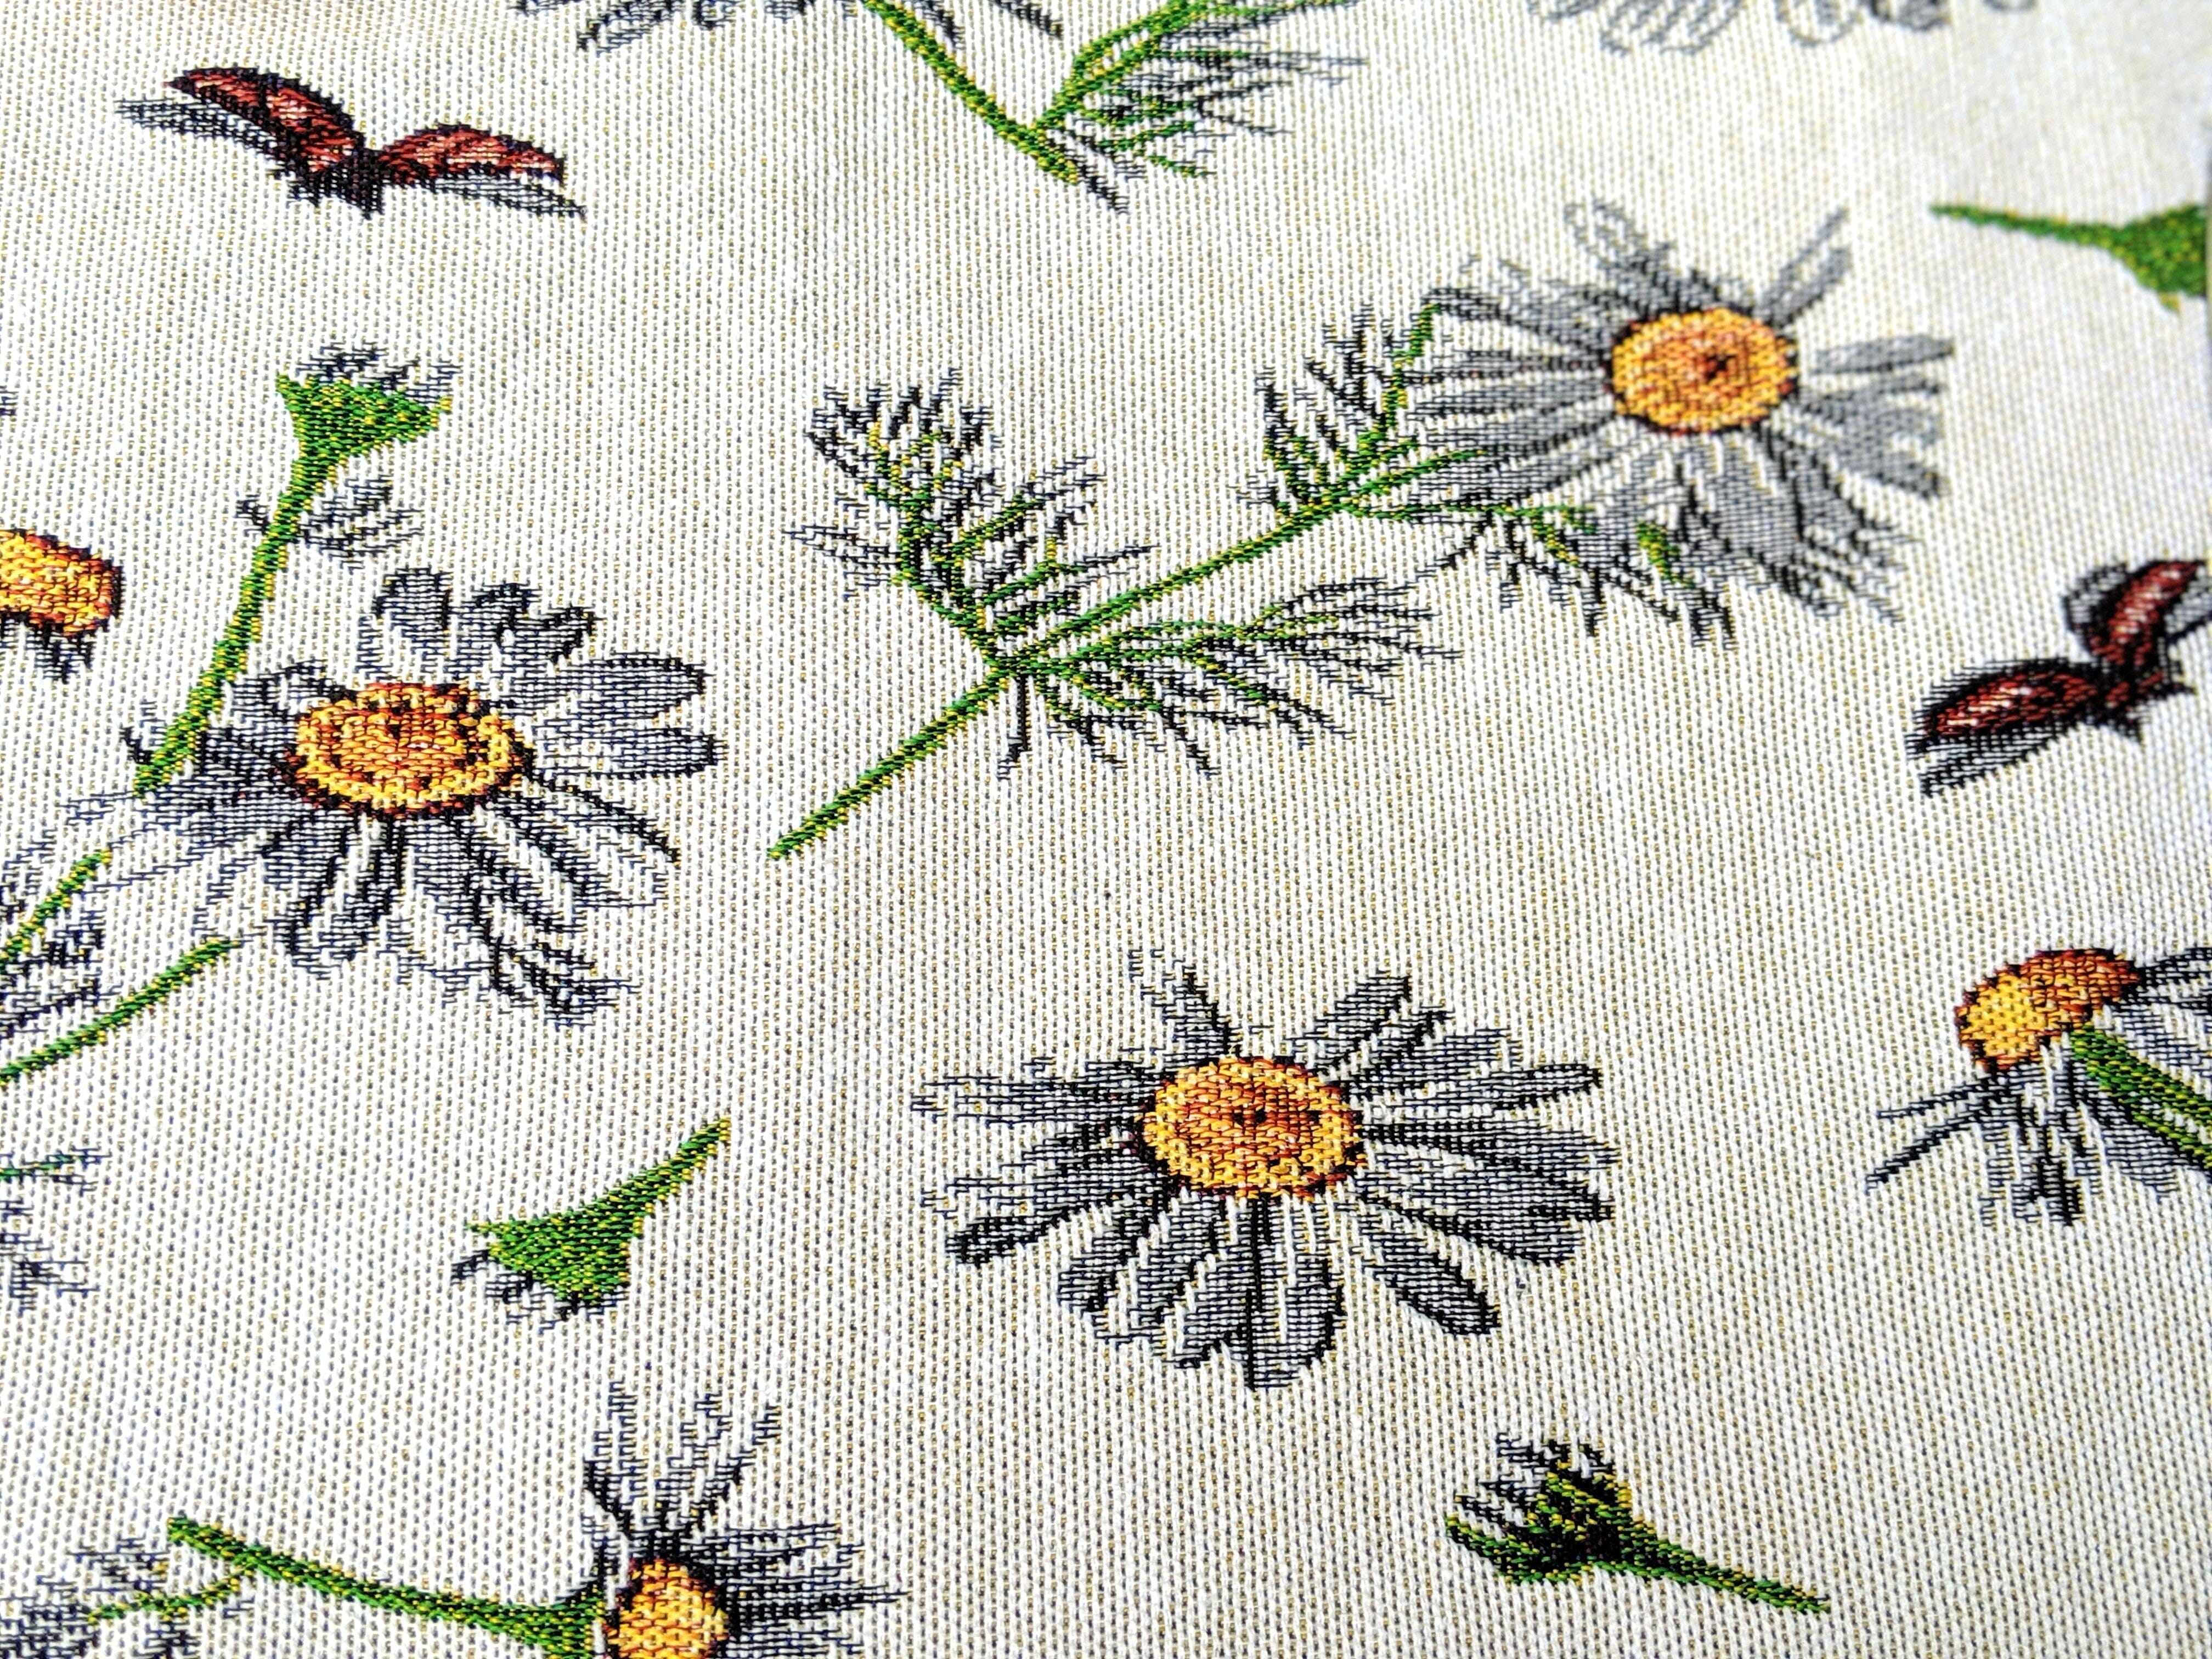 Tache White Grey Gray Yellow Floral Daisies Ladybugs Woven Tapestry Cotton Cloth Placemats Kitchen Table Mat Set 